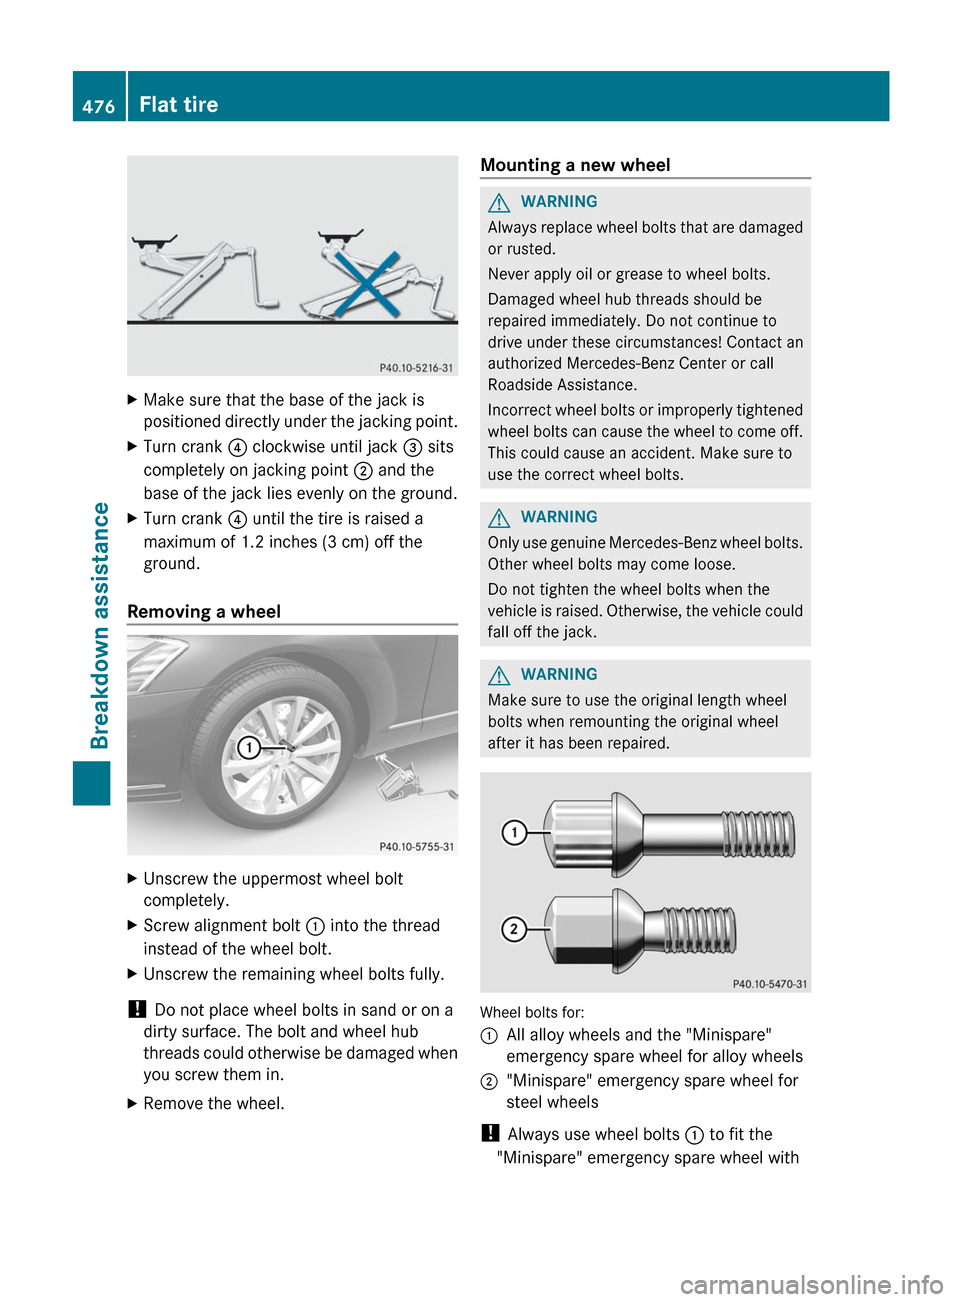 MERCEDES-BENZ S-Class 2012 W221 Owners Manual XMake sure that the base of the jack is
positioned directly under the jacking point.XTurn crank  ? clockwise until jack  = sits
completely on jacking point  ; and the
base of the jack lies evenly on t